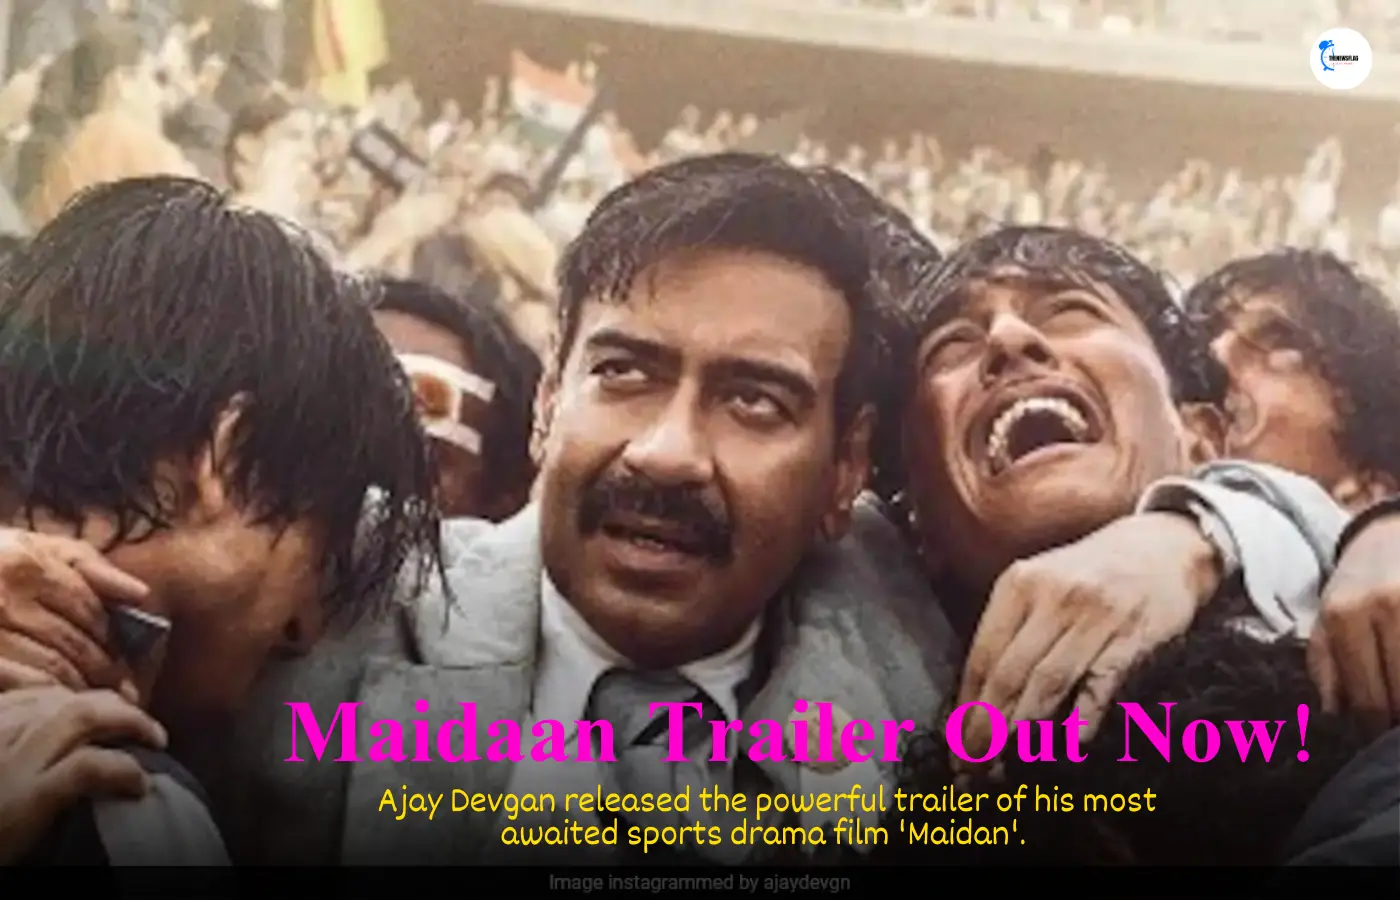 Maidaan Trailer Out Now!